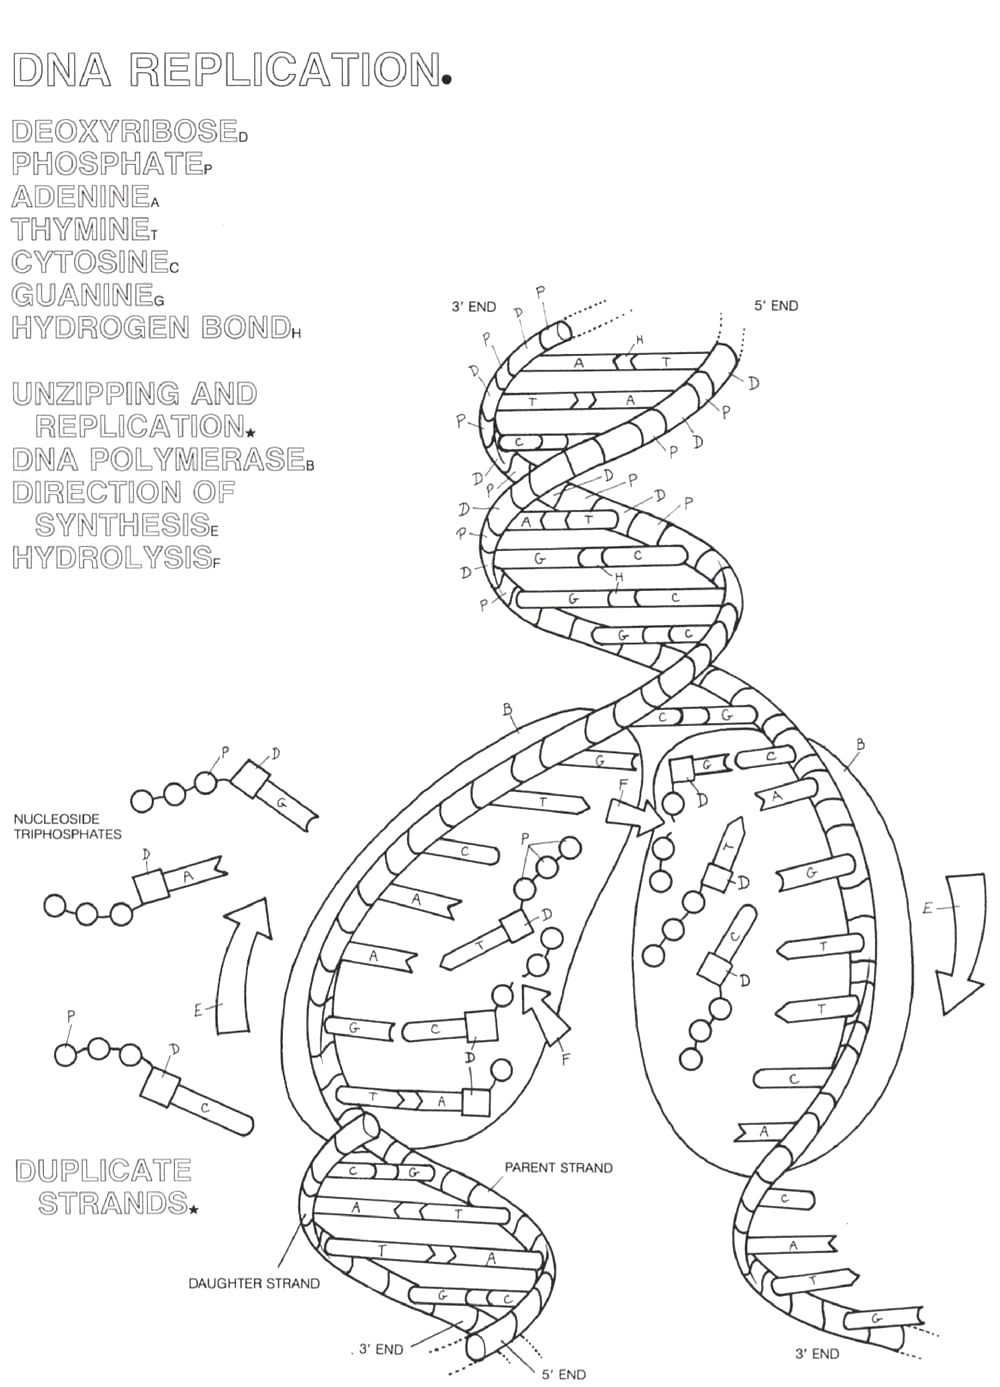 Dna Replication Coloring Page  Coloring Home Pertaining To Dna Replication Coloring Worksheet